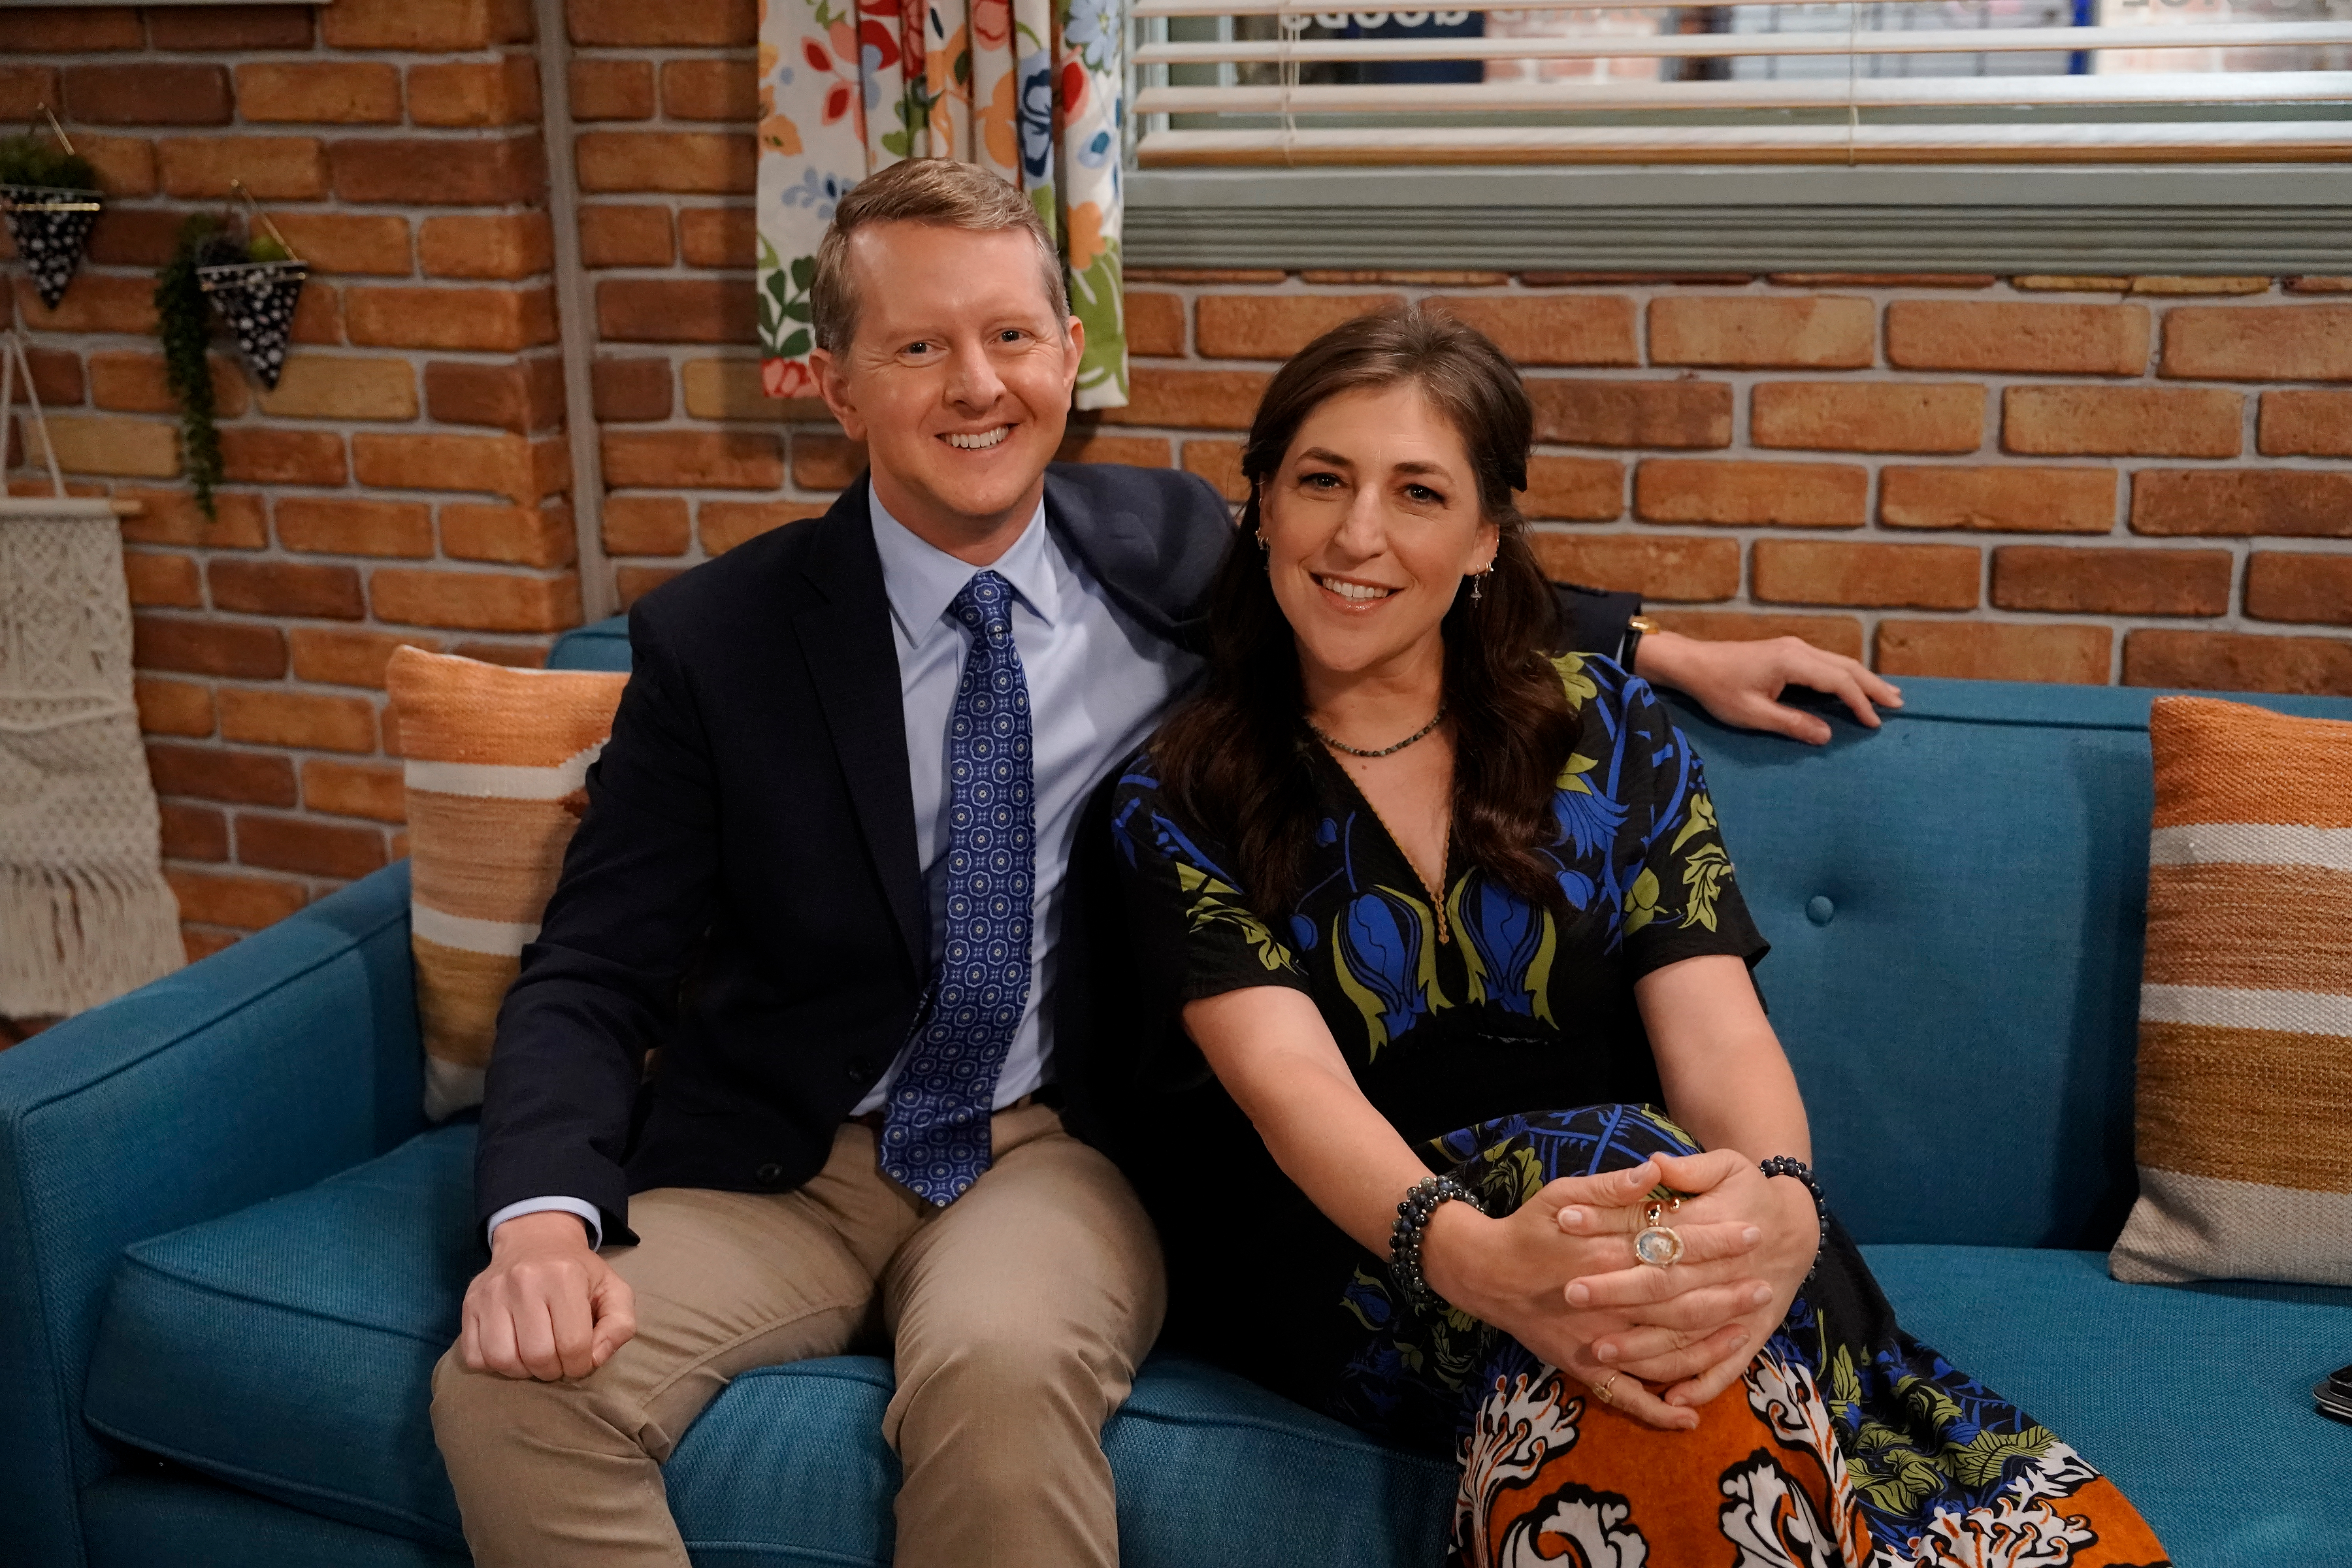 Ken Jennings hosts all other Jeopardy! shows after Mayim Bialik was fired in December